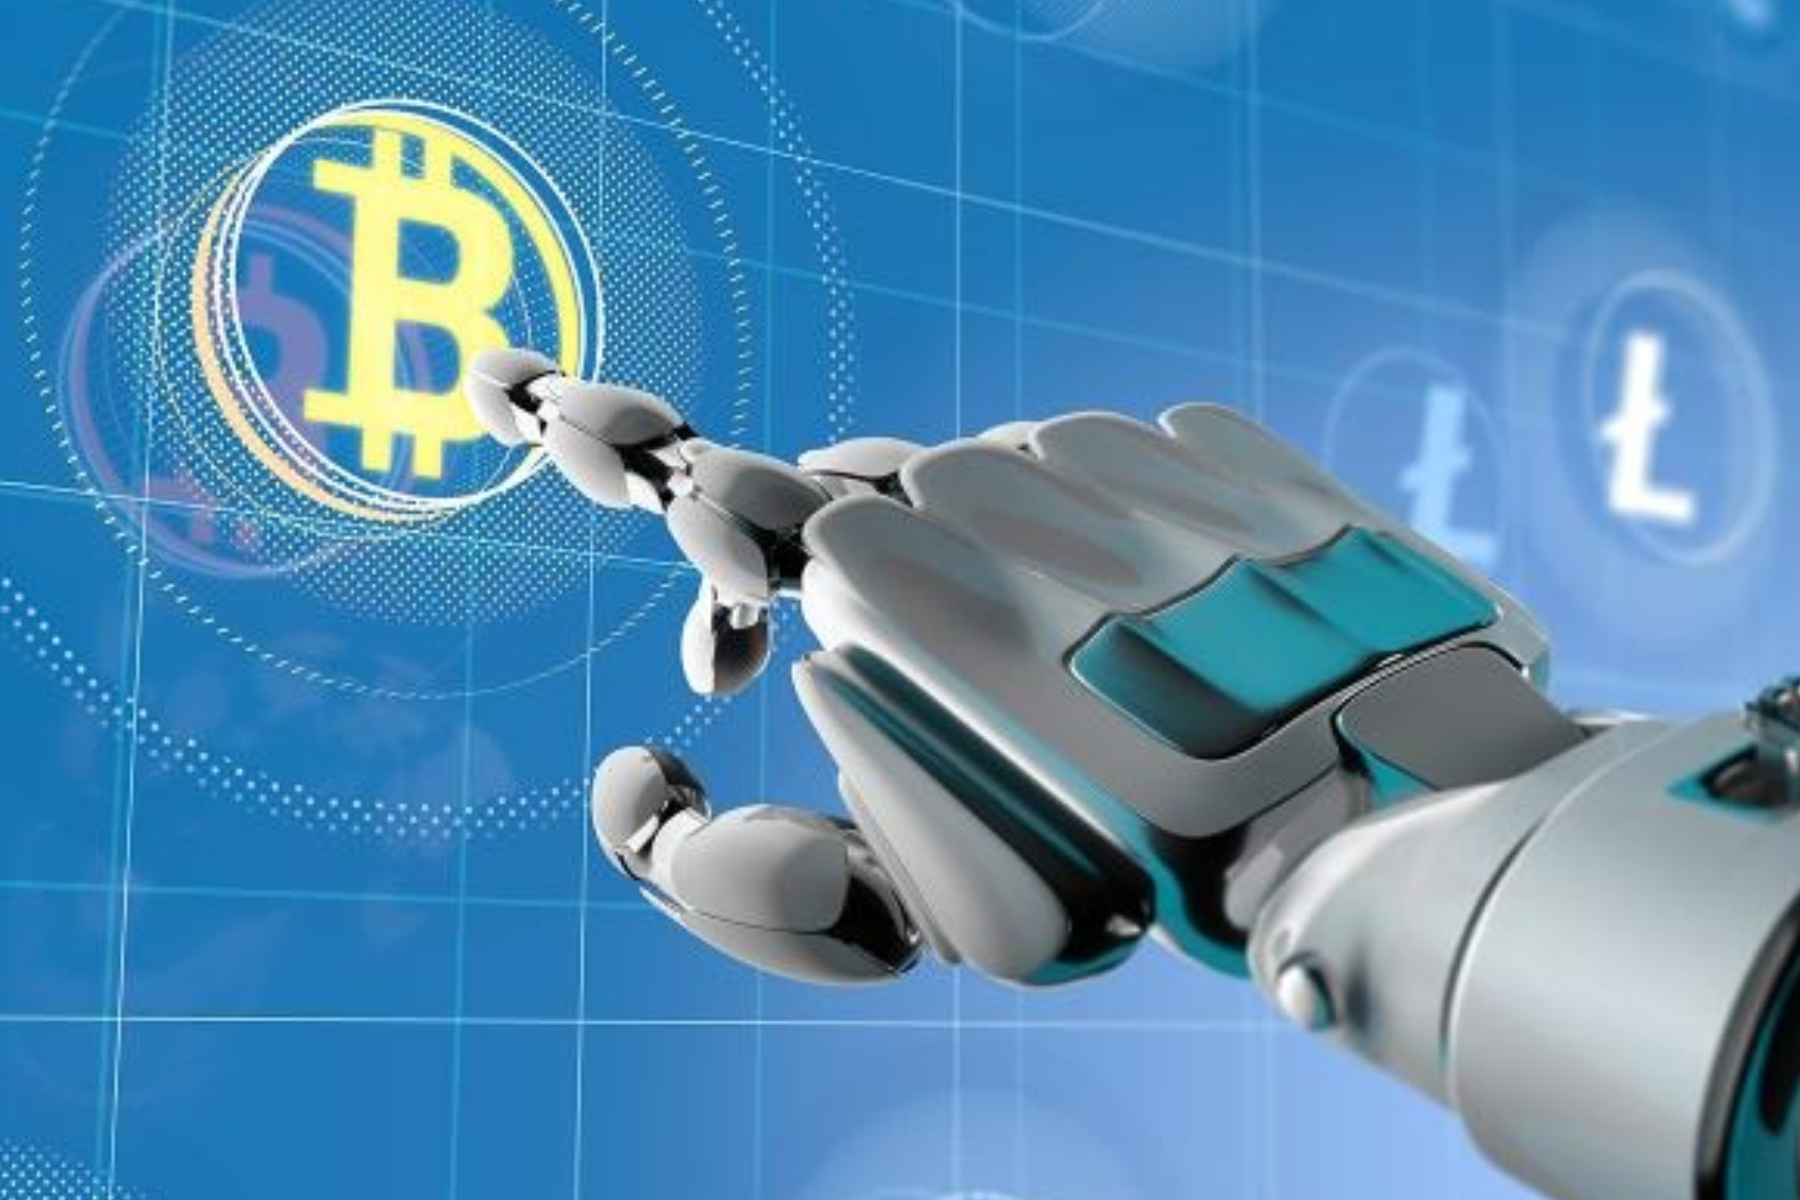 In the image, a robot is shown clicking on a Bitcoin logo